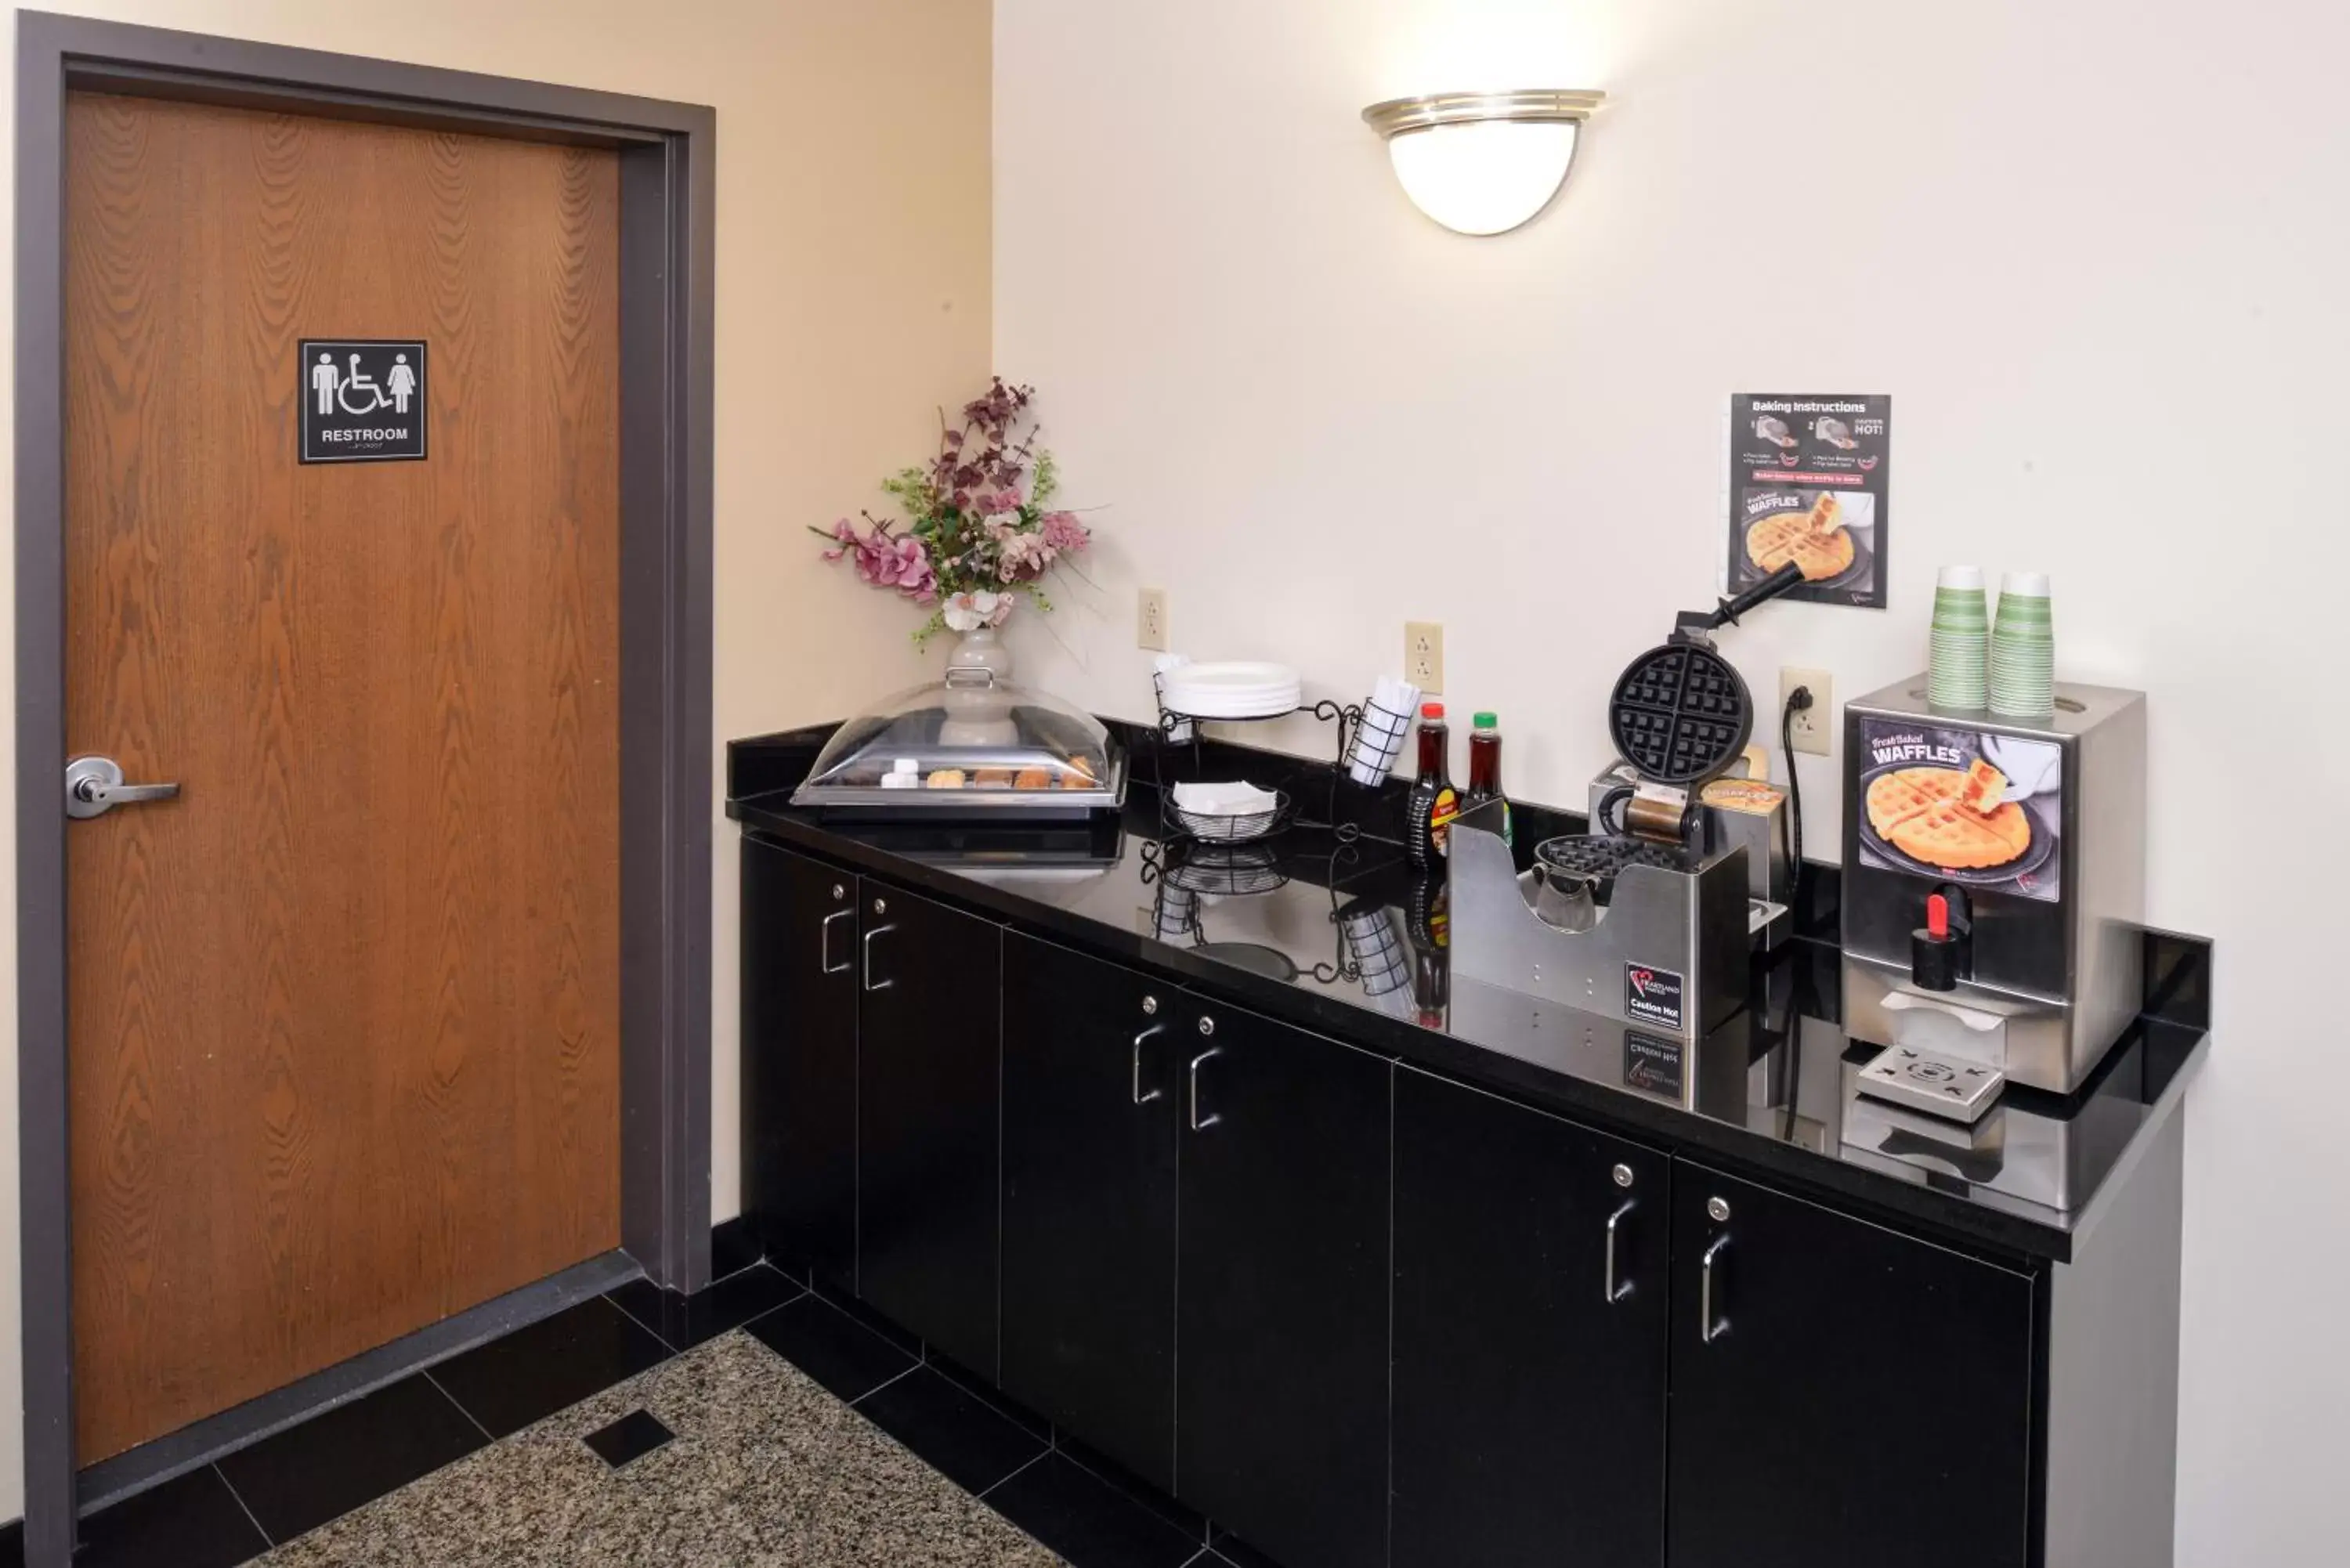 Area and facilities in Americas Best Value Inn - Collinsville / St. Louis